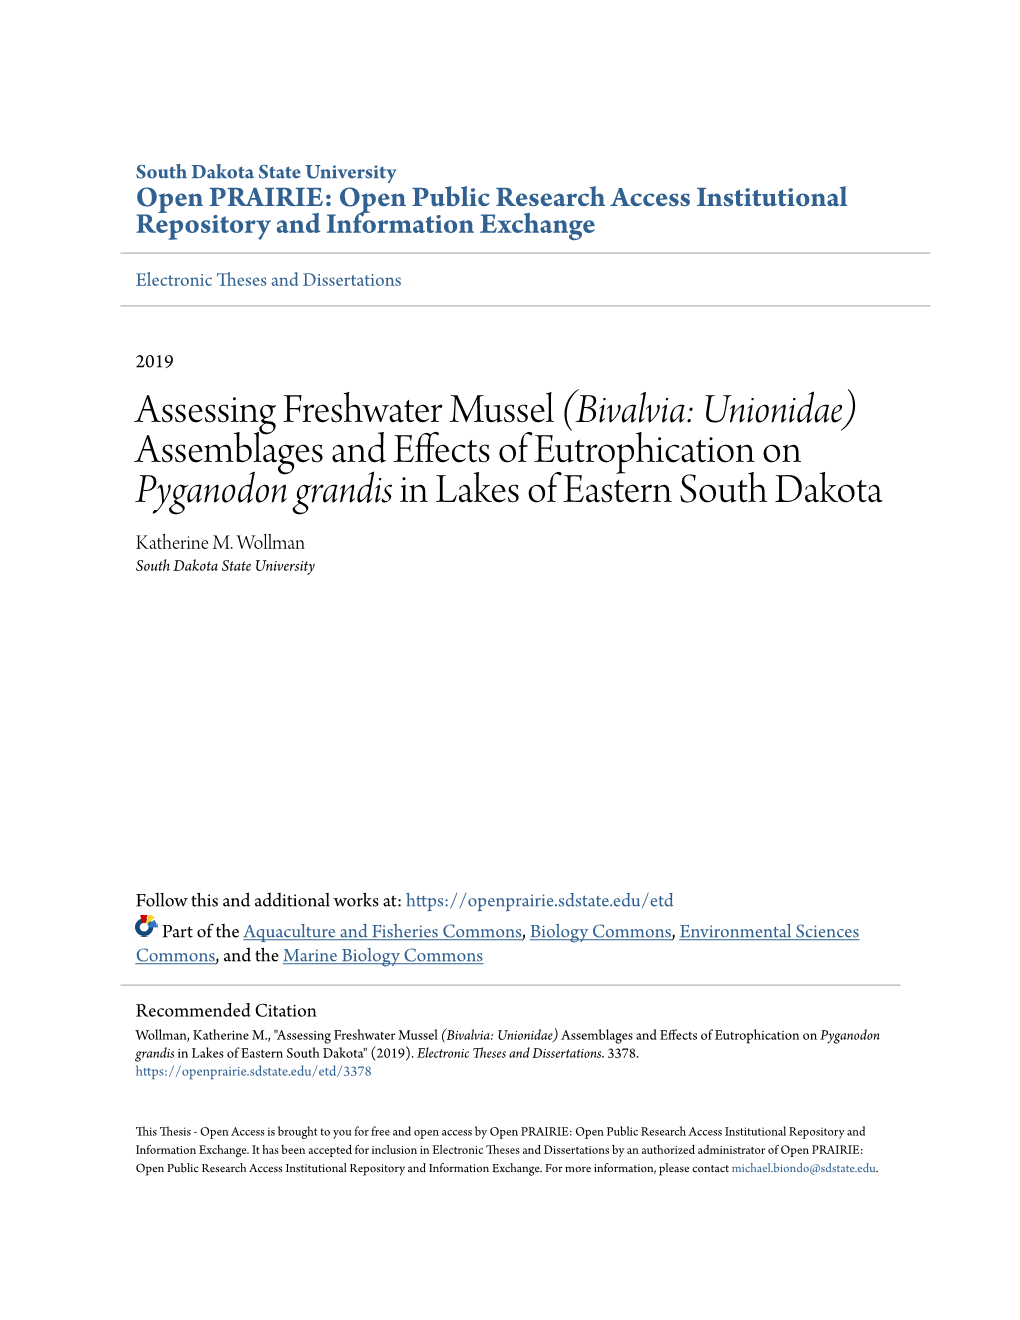 Assessing Freshwater Mussel (Bivalvia: Unionidae) Assemblages and Effects of Eutrophication on Pyganodon Grandis in Lakes of Eastern South Dakota Katherine M